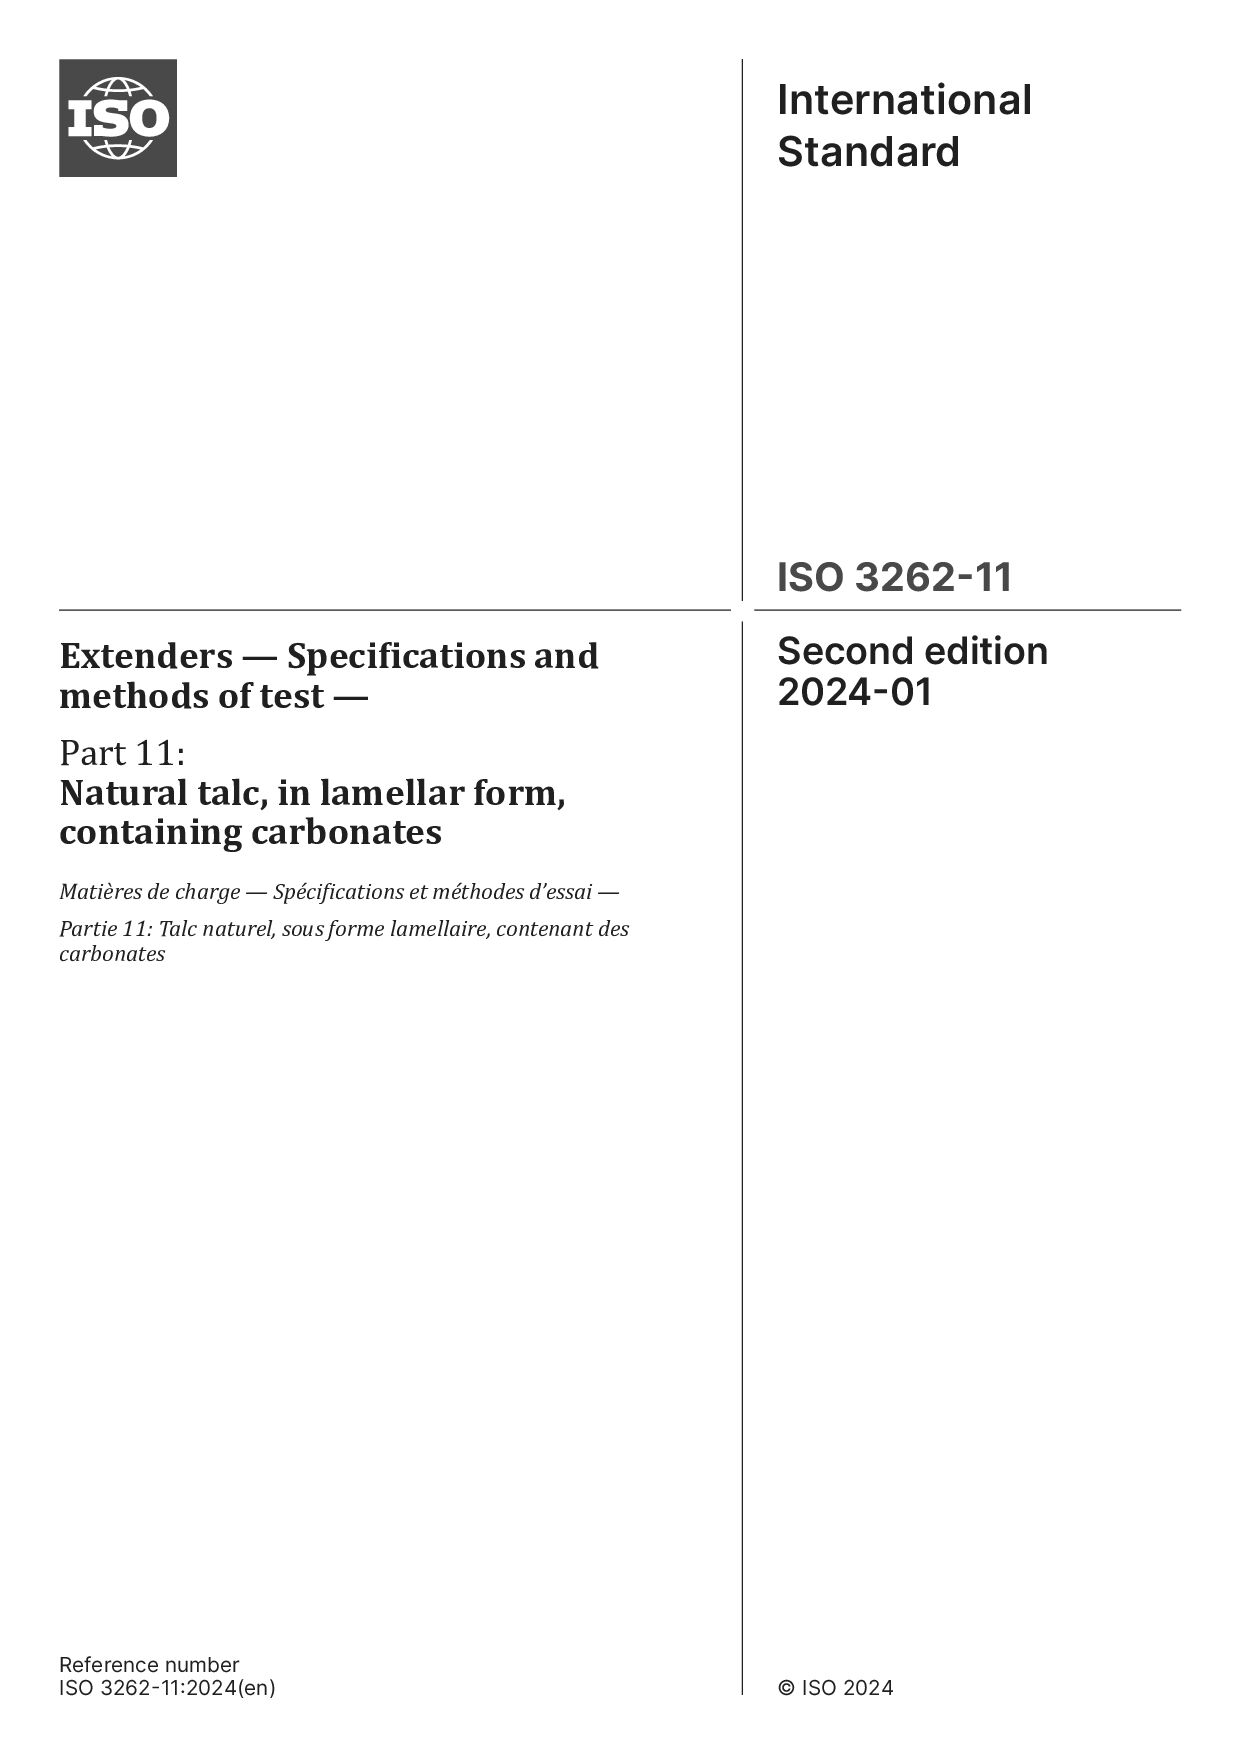 ISO 3262-11:2024